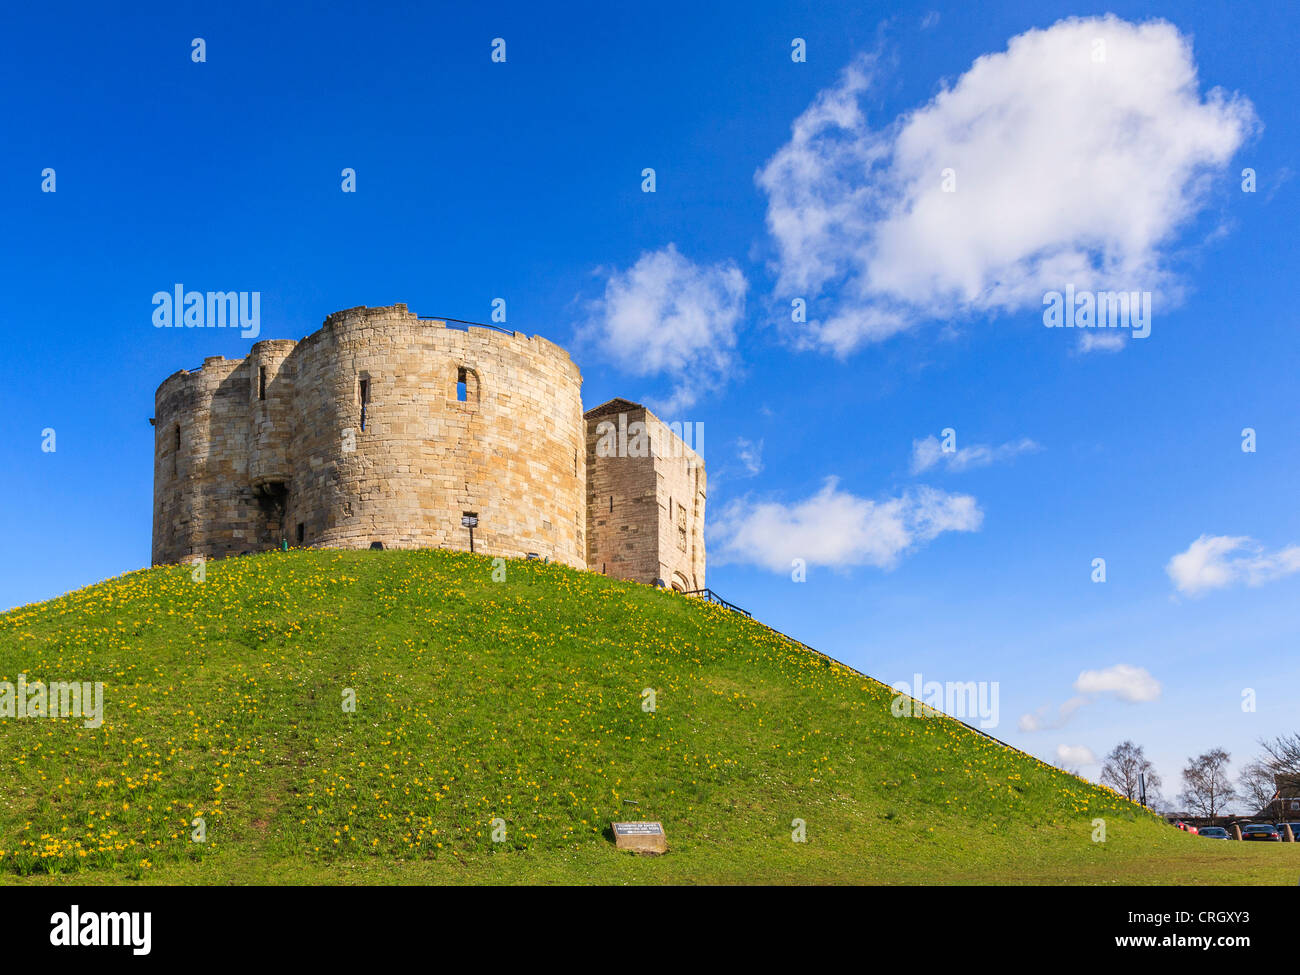 Clifford's Tower à York, Angleterre Banque D'Images